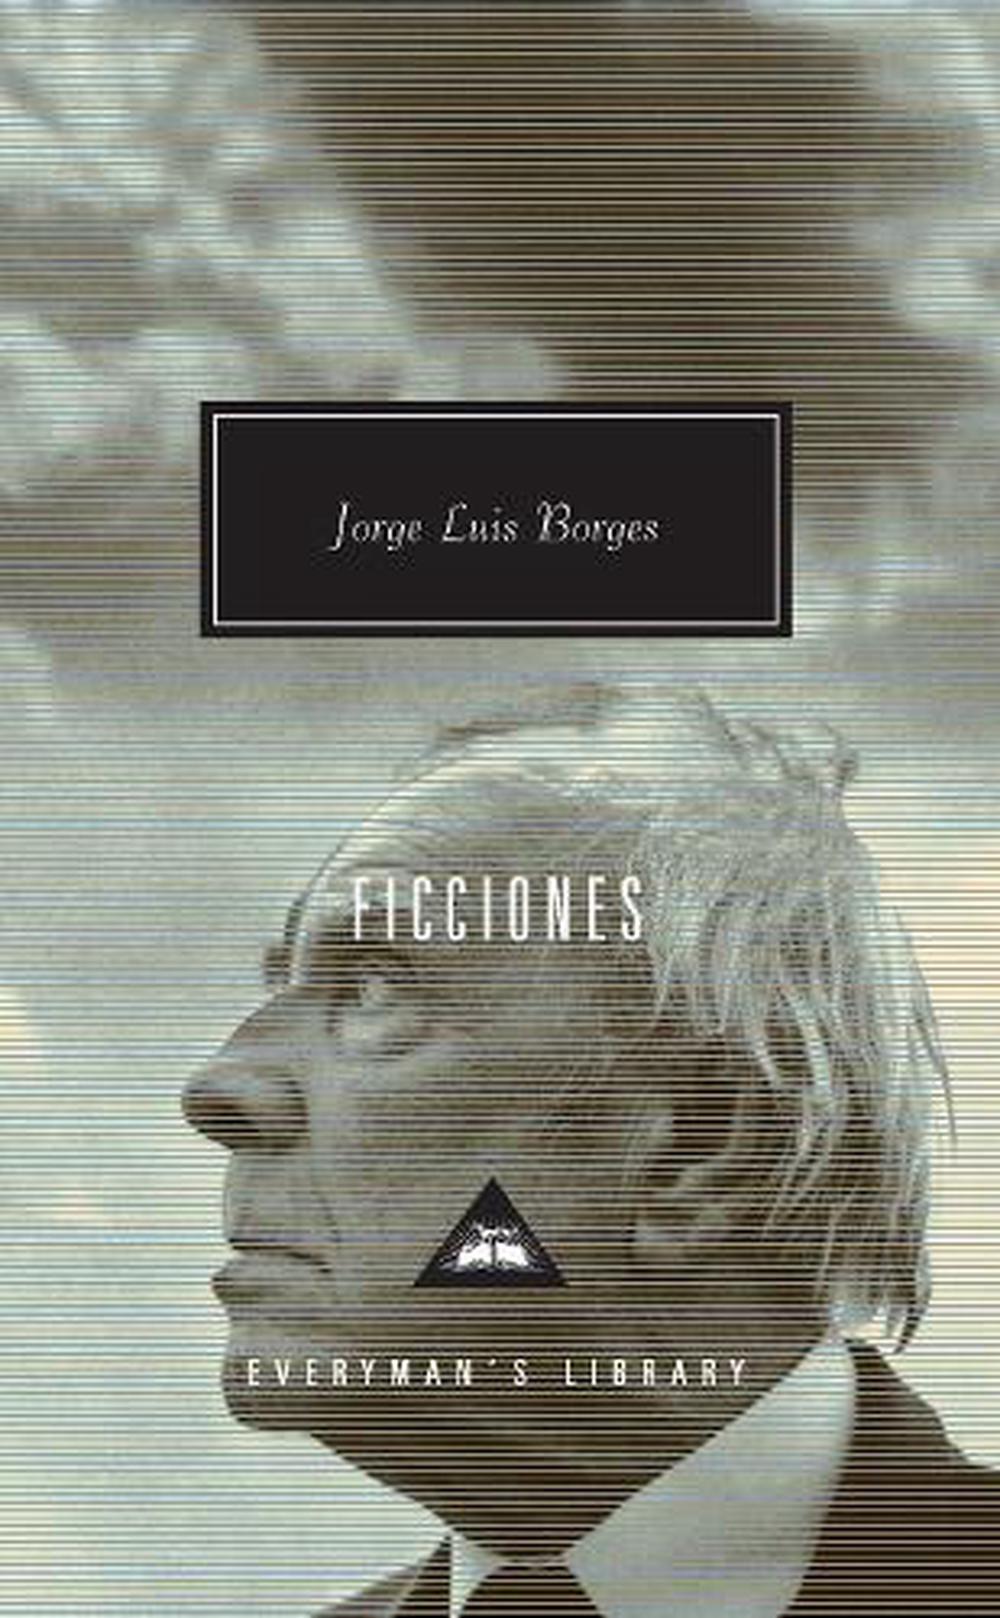 collected fictions of jorge luis borges